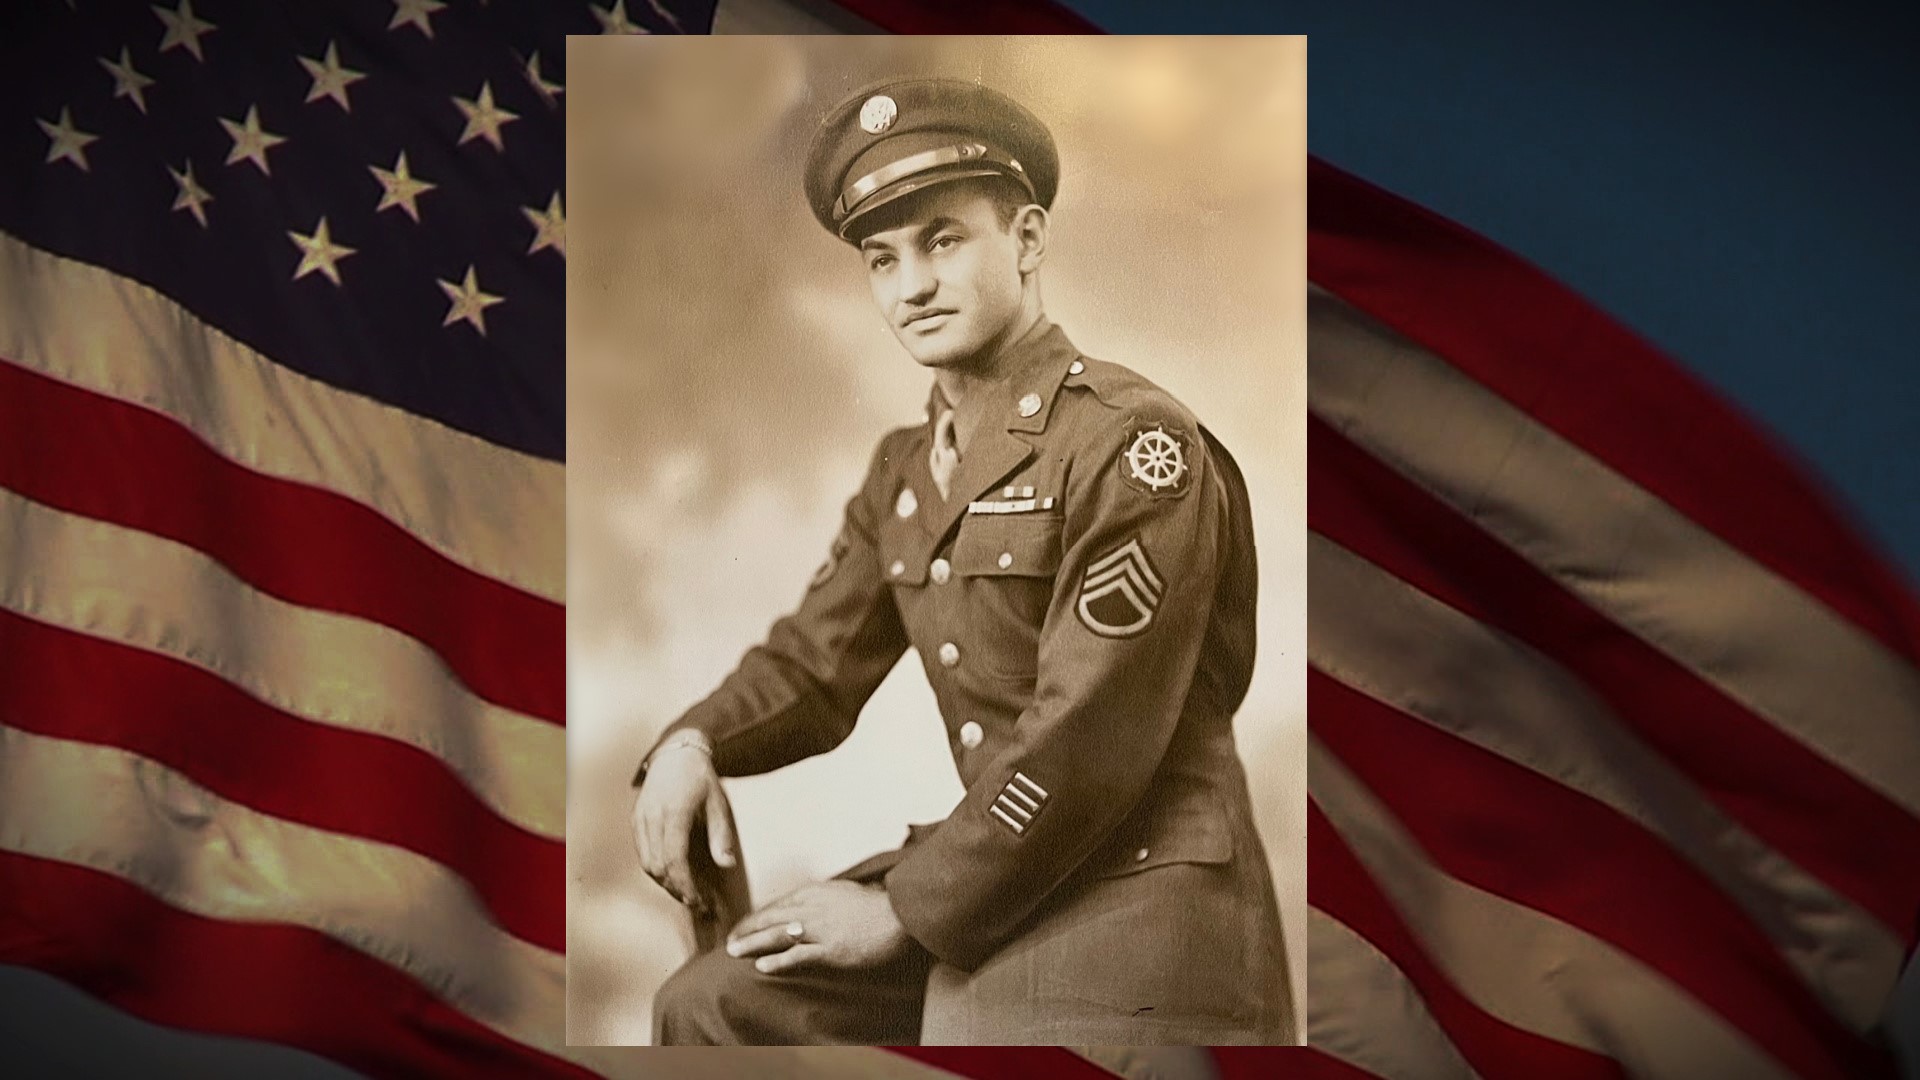 He's one of the oldest veterans left in our area and still has vivid memories from the war. Jon Meyer shares a conversation with this humble vet from Luzerne County.